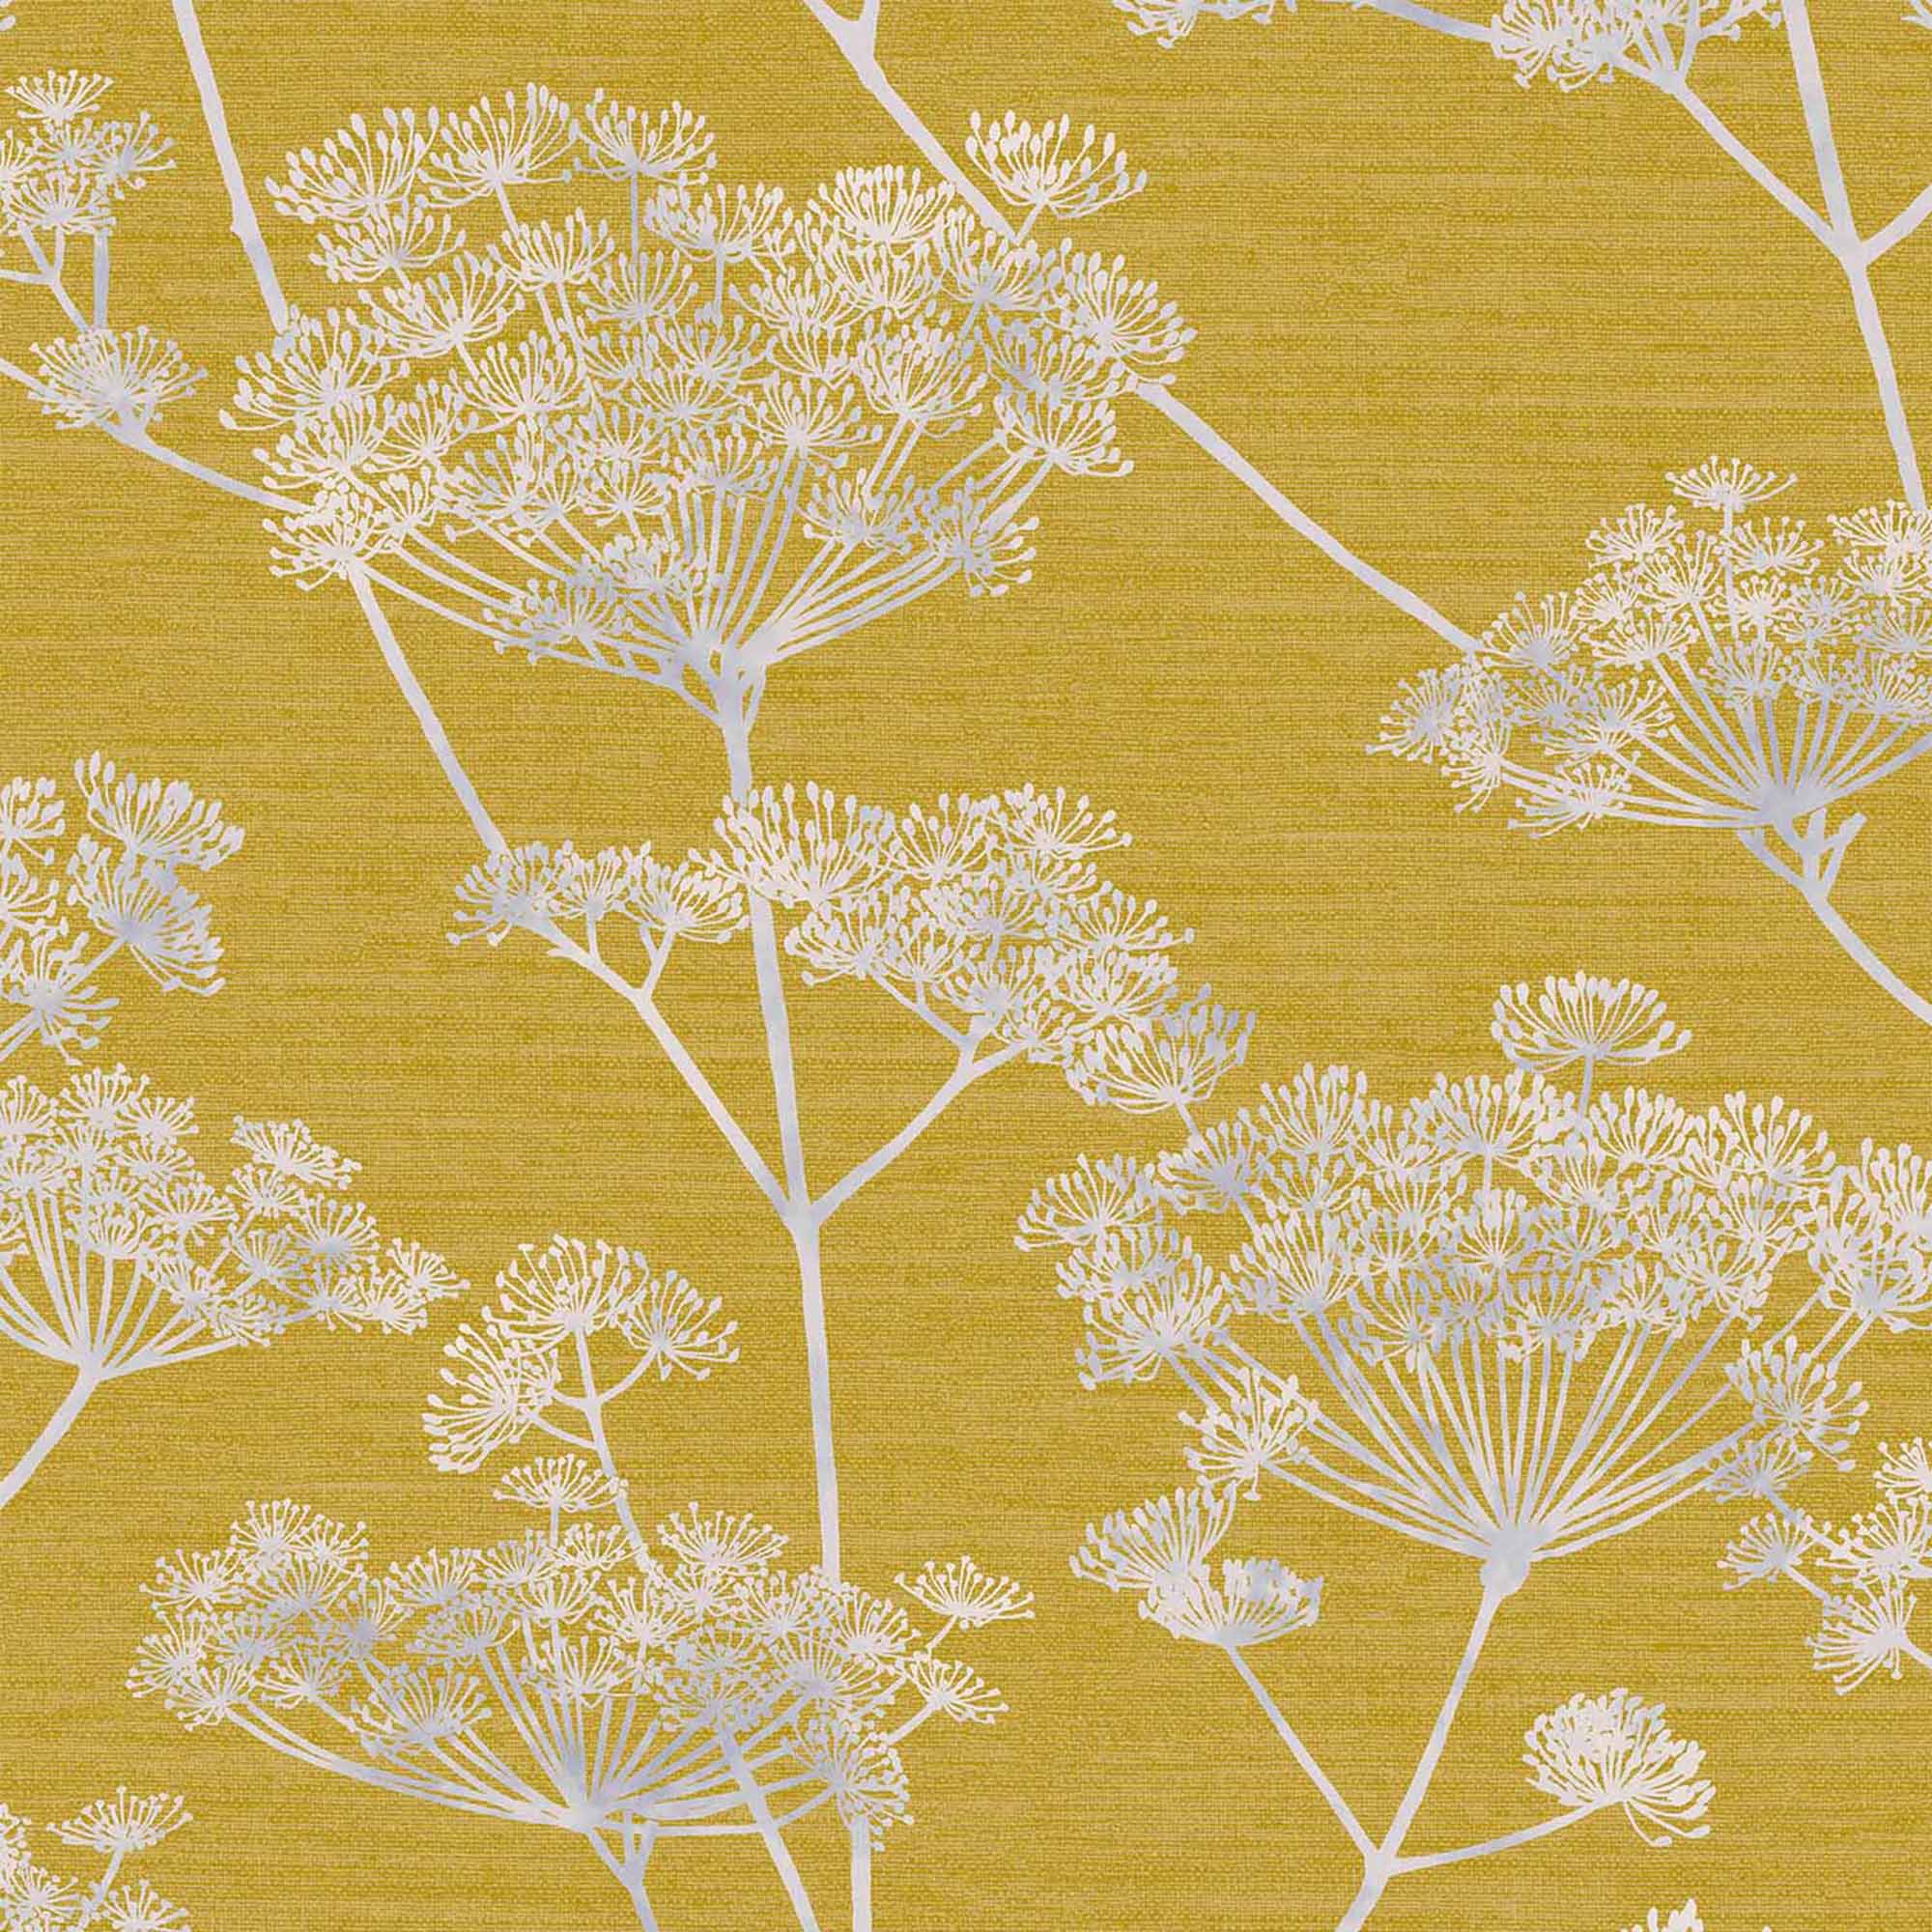 Graham ＆ Brown Flourish Floral Removable Paste The Wall Wallpaper